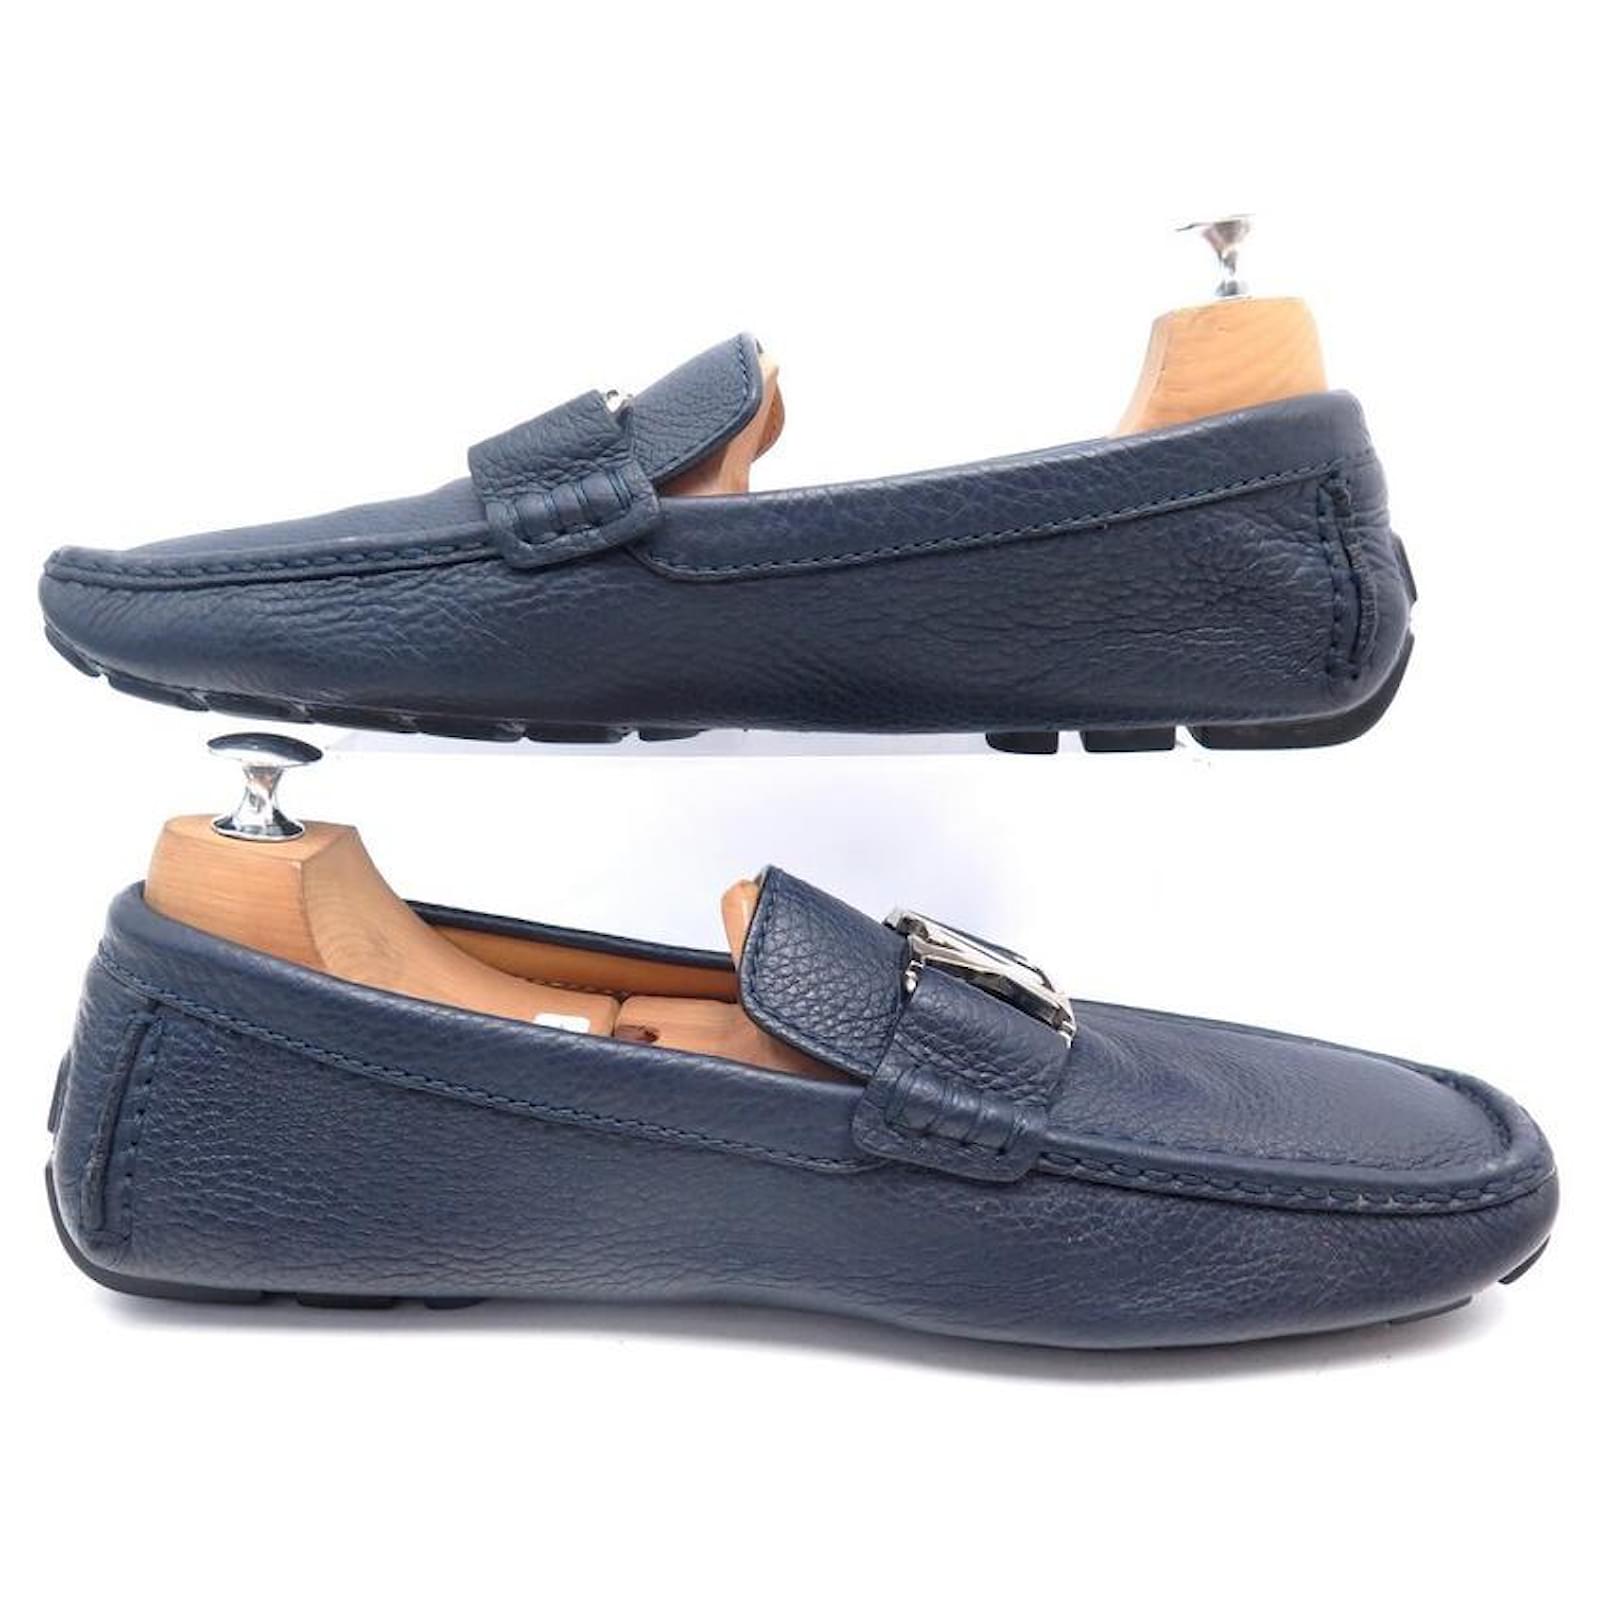 LOUIS VUITTON MENS BLUE LEATHER LOAFER SHOES SIZE 7.5